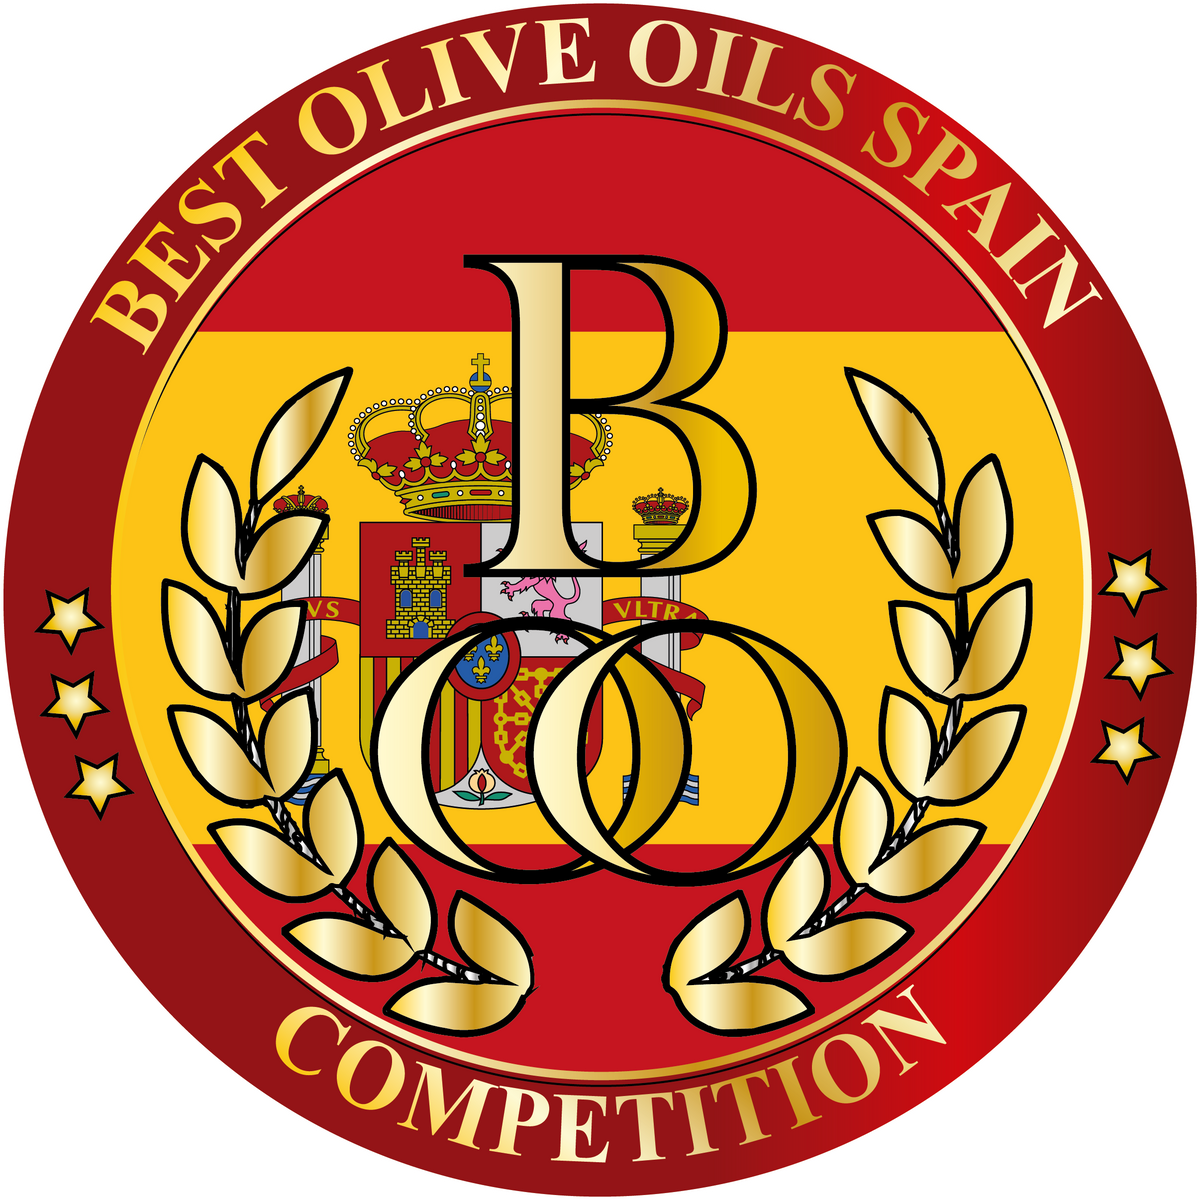 best organic olive oils competition